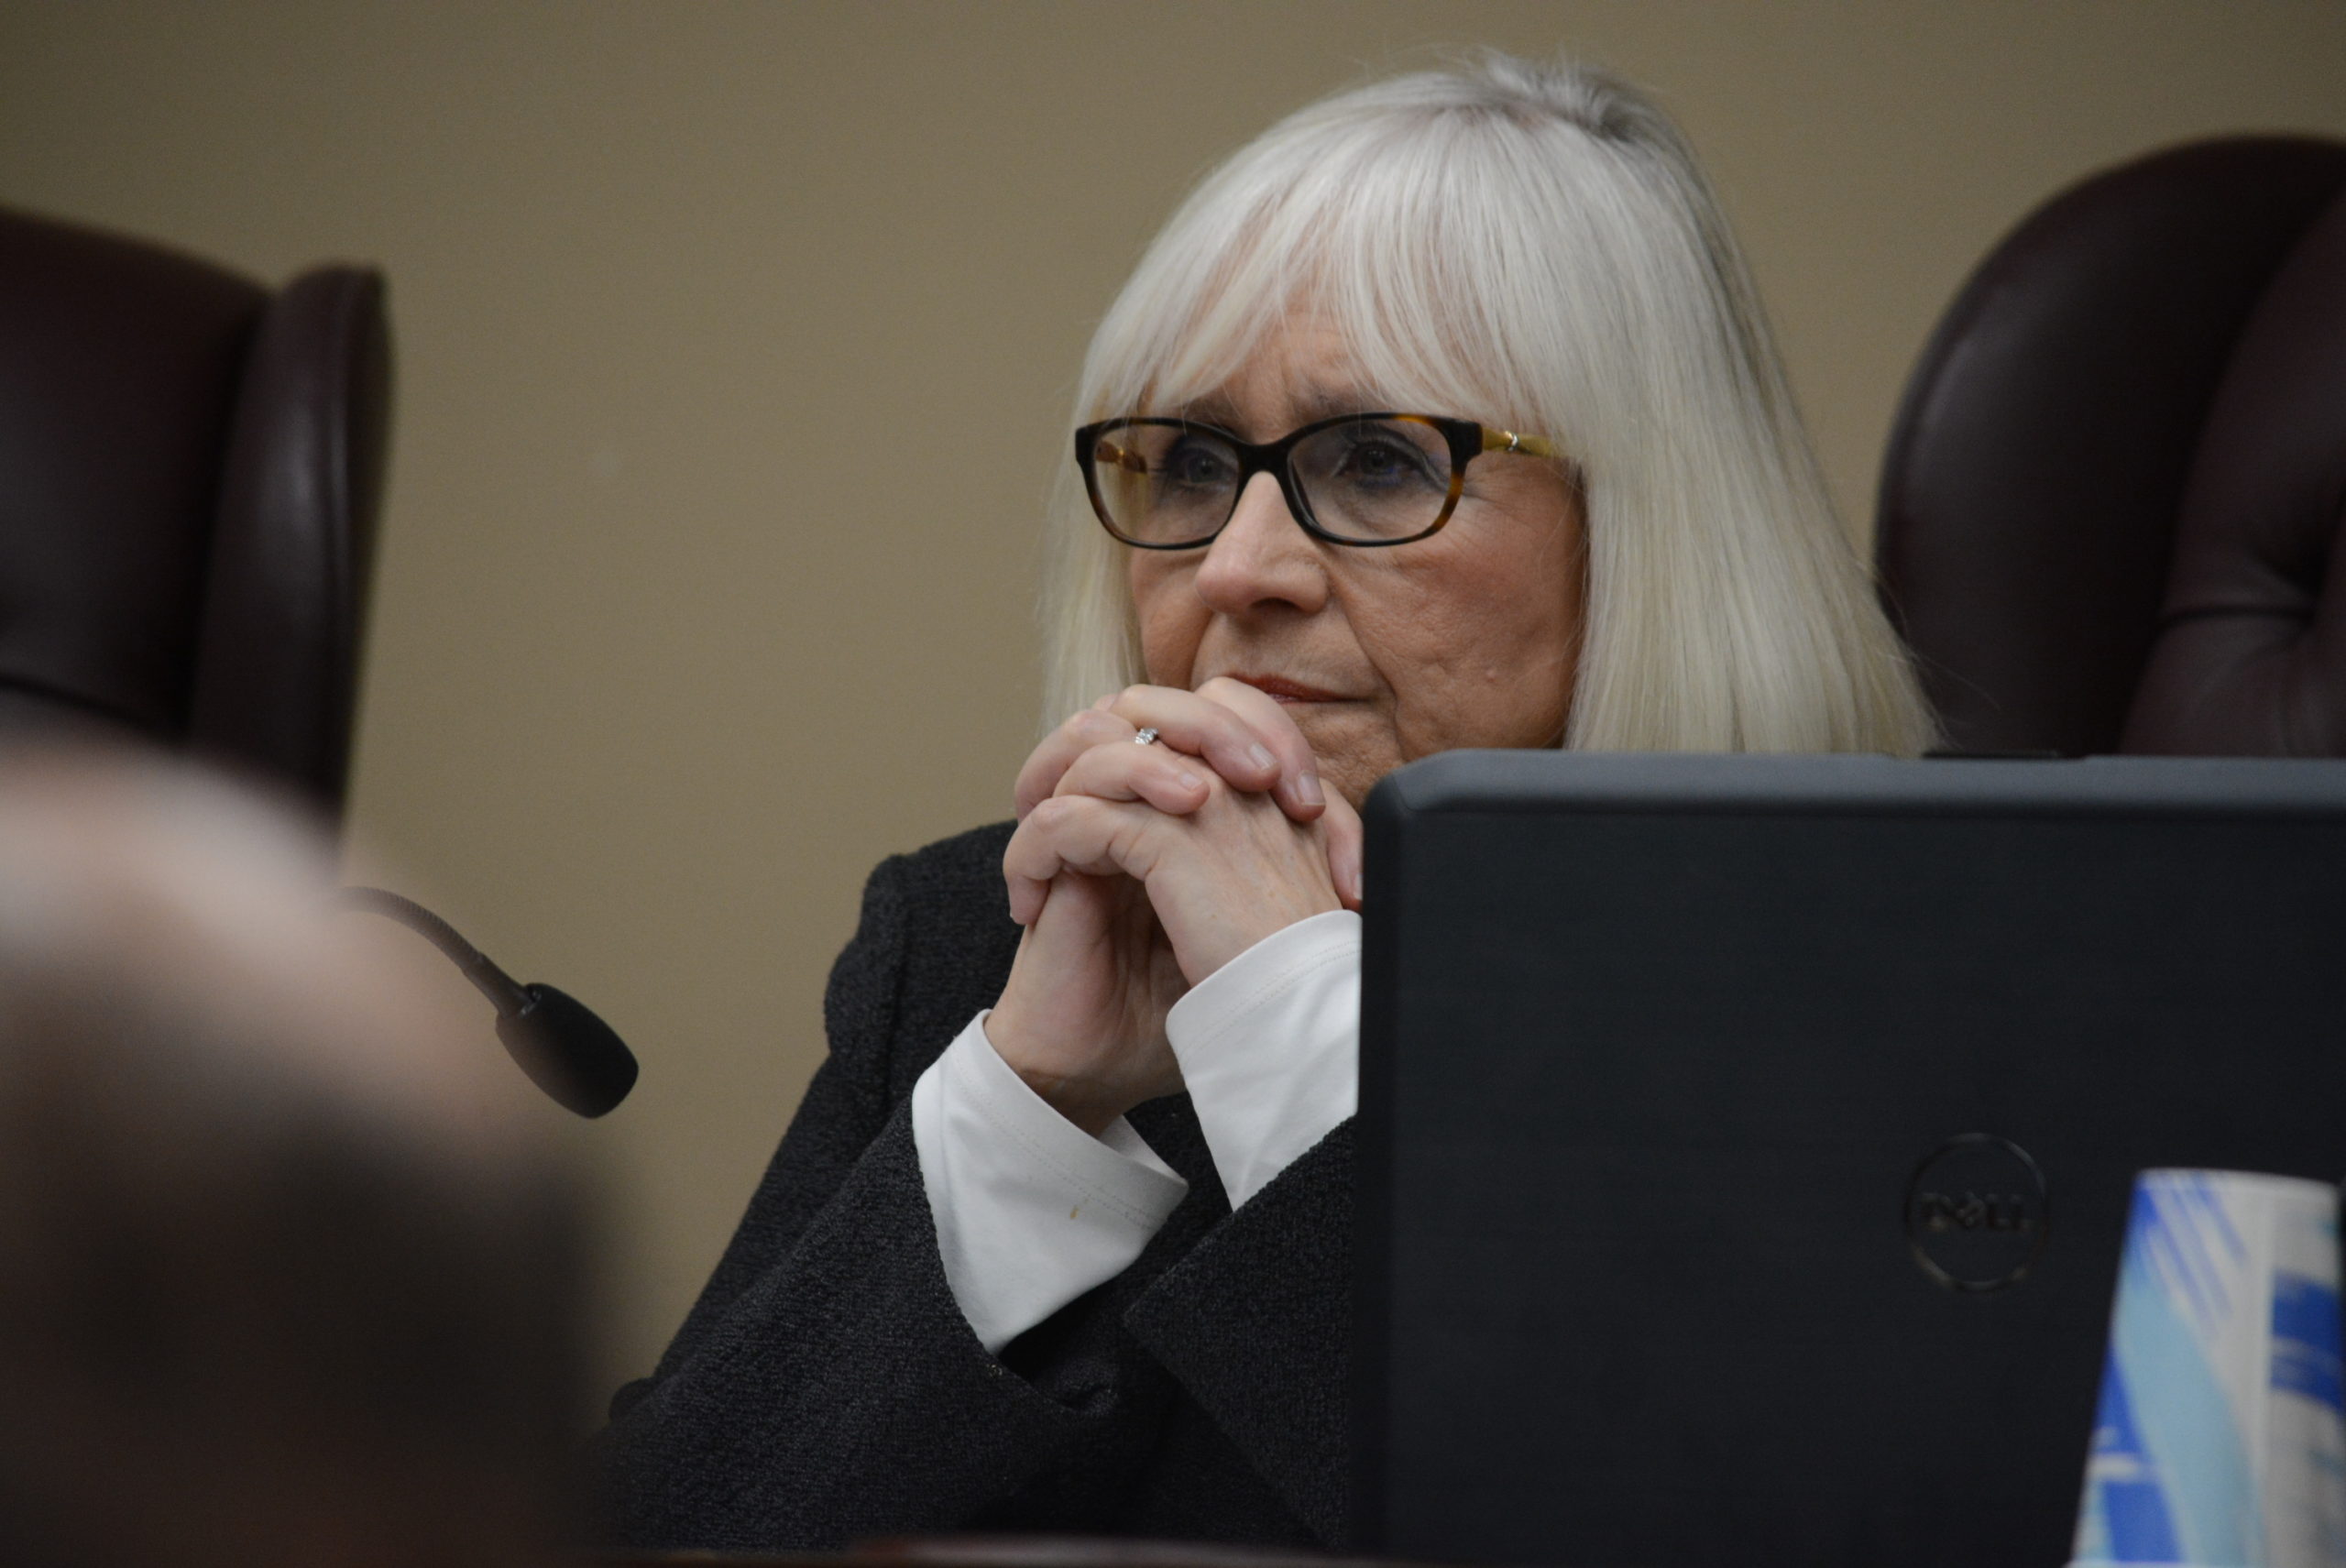 Town Supervisor Judi Bosworth, as seen at the Feb. 27 town board meeting, noted that Jessica Lamendola would serve as acting comptroller until another one could be found. (Photo by Janelle Clausen)